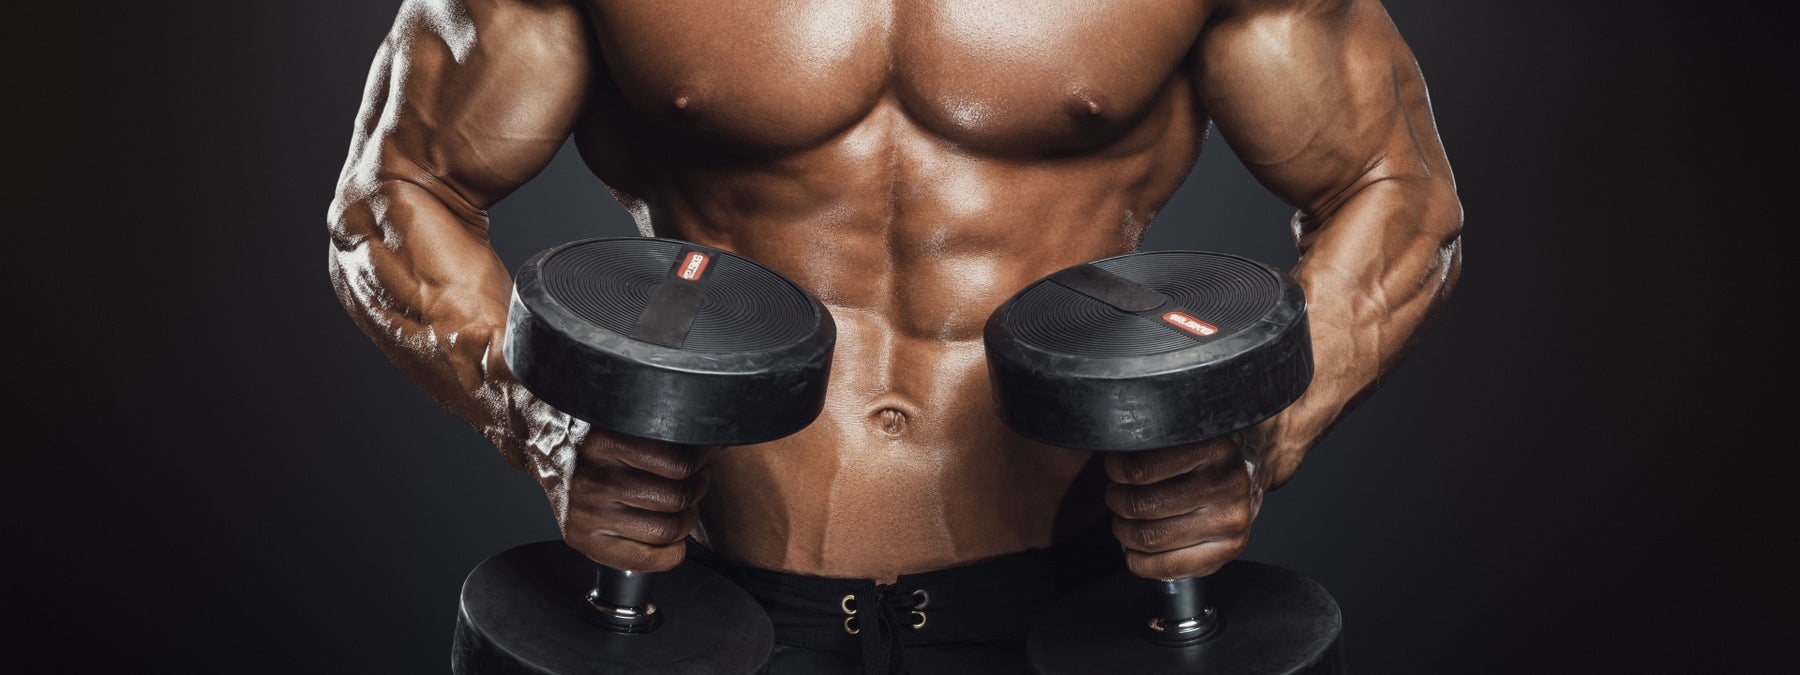 Build the Best Dumbbell Only Workout and Make Serious Gains